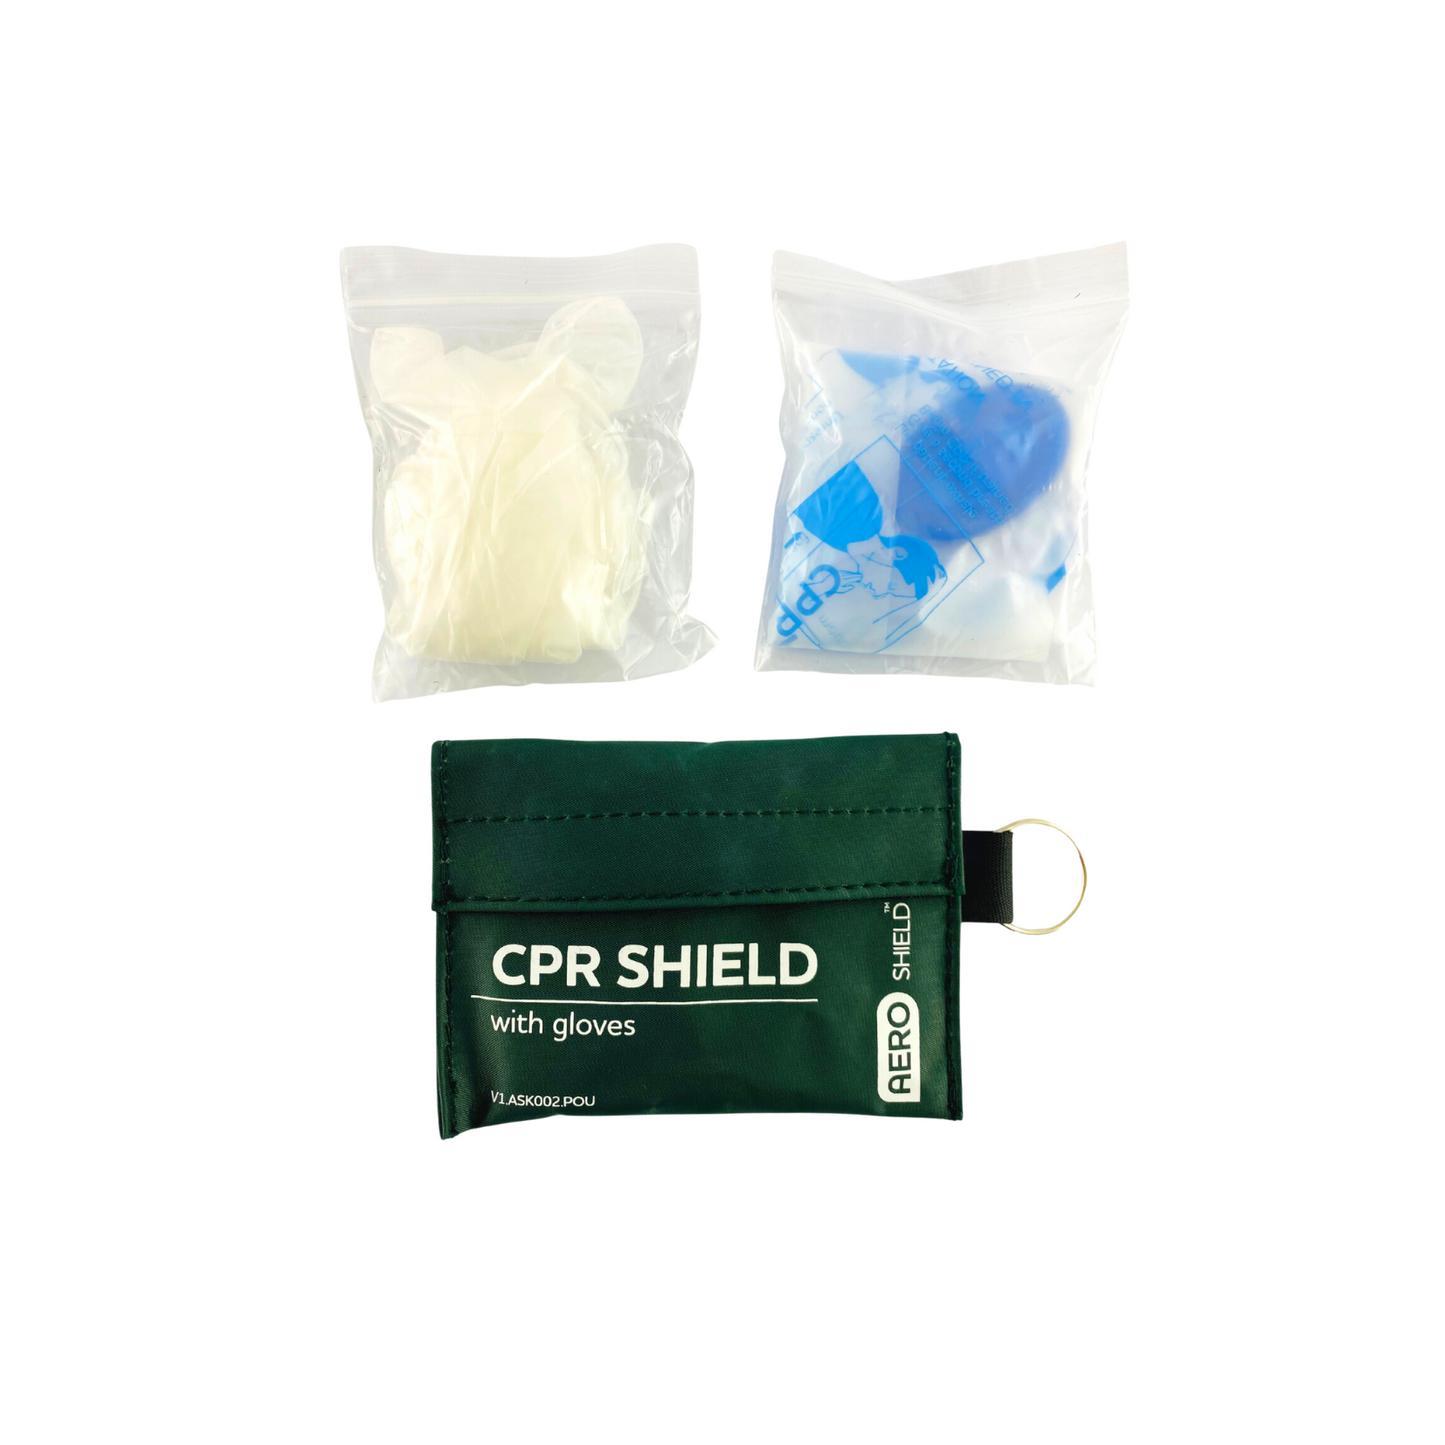 CPR Face Shield with Gloves in Pouch Keyring - Aero (1)